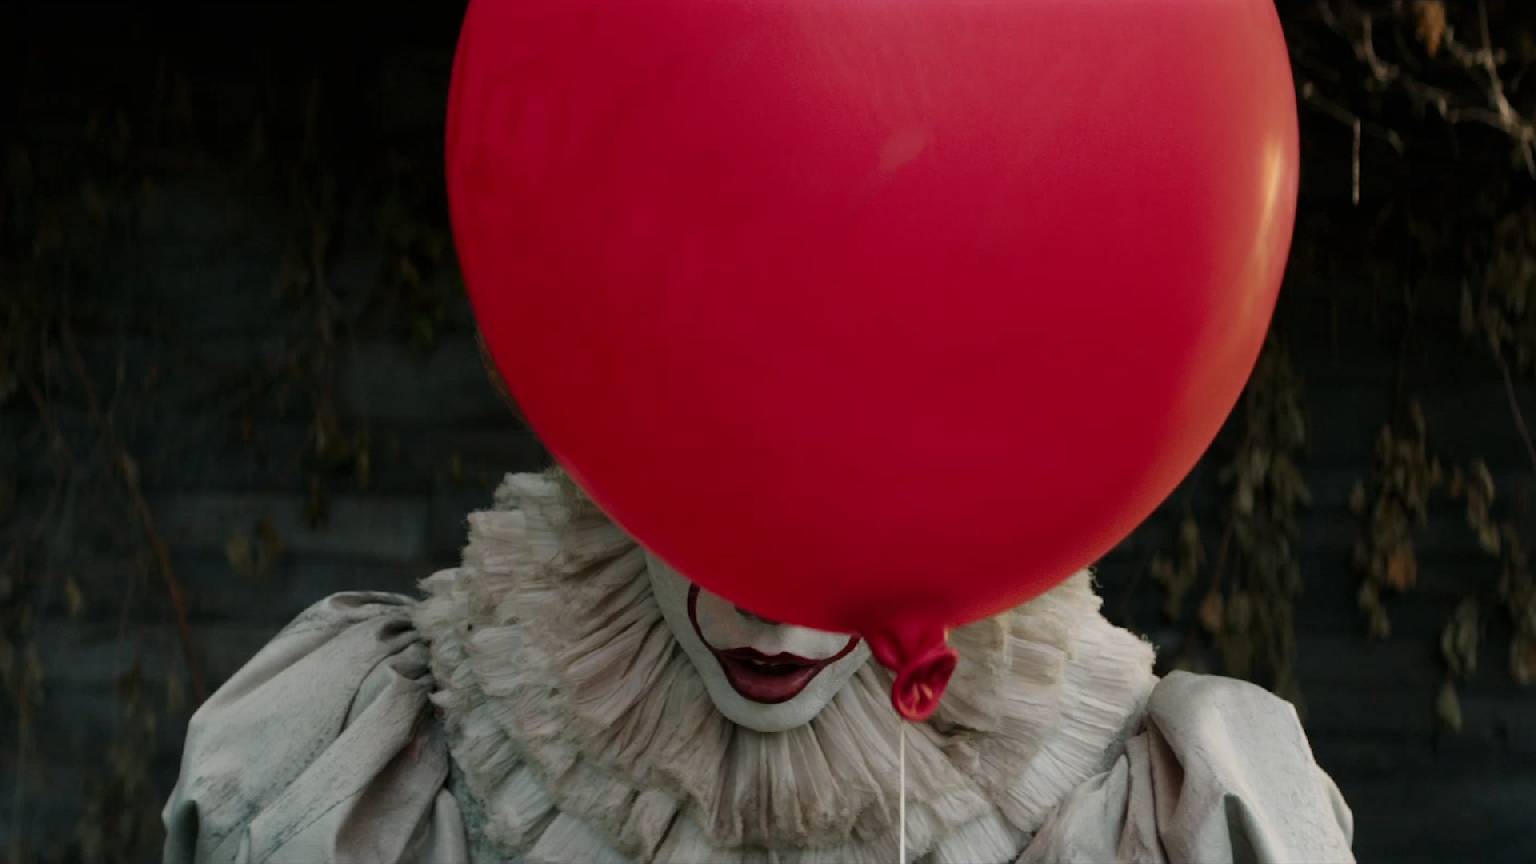 ‘IT’ Now Highest-Grossing R-Rated Horror Film